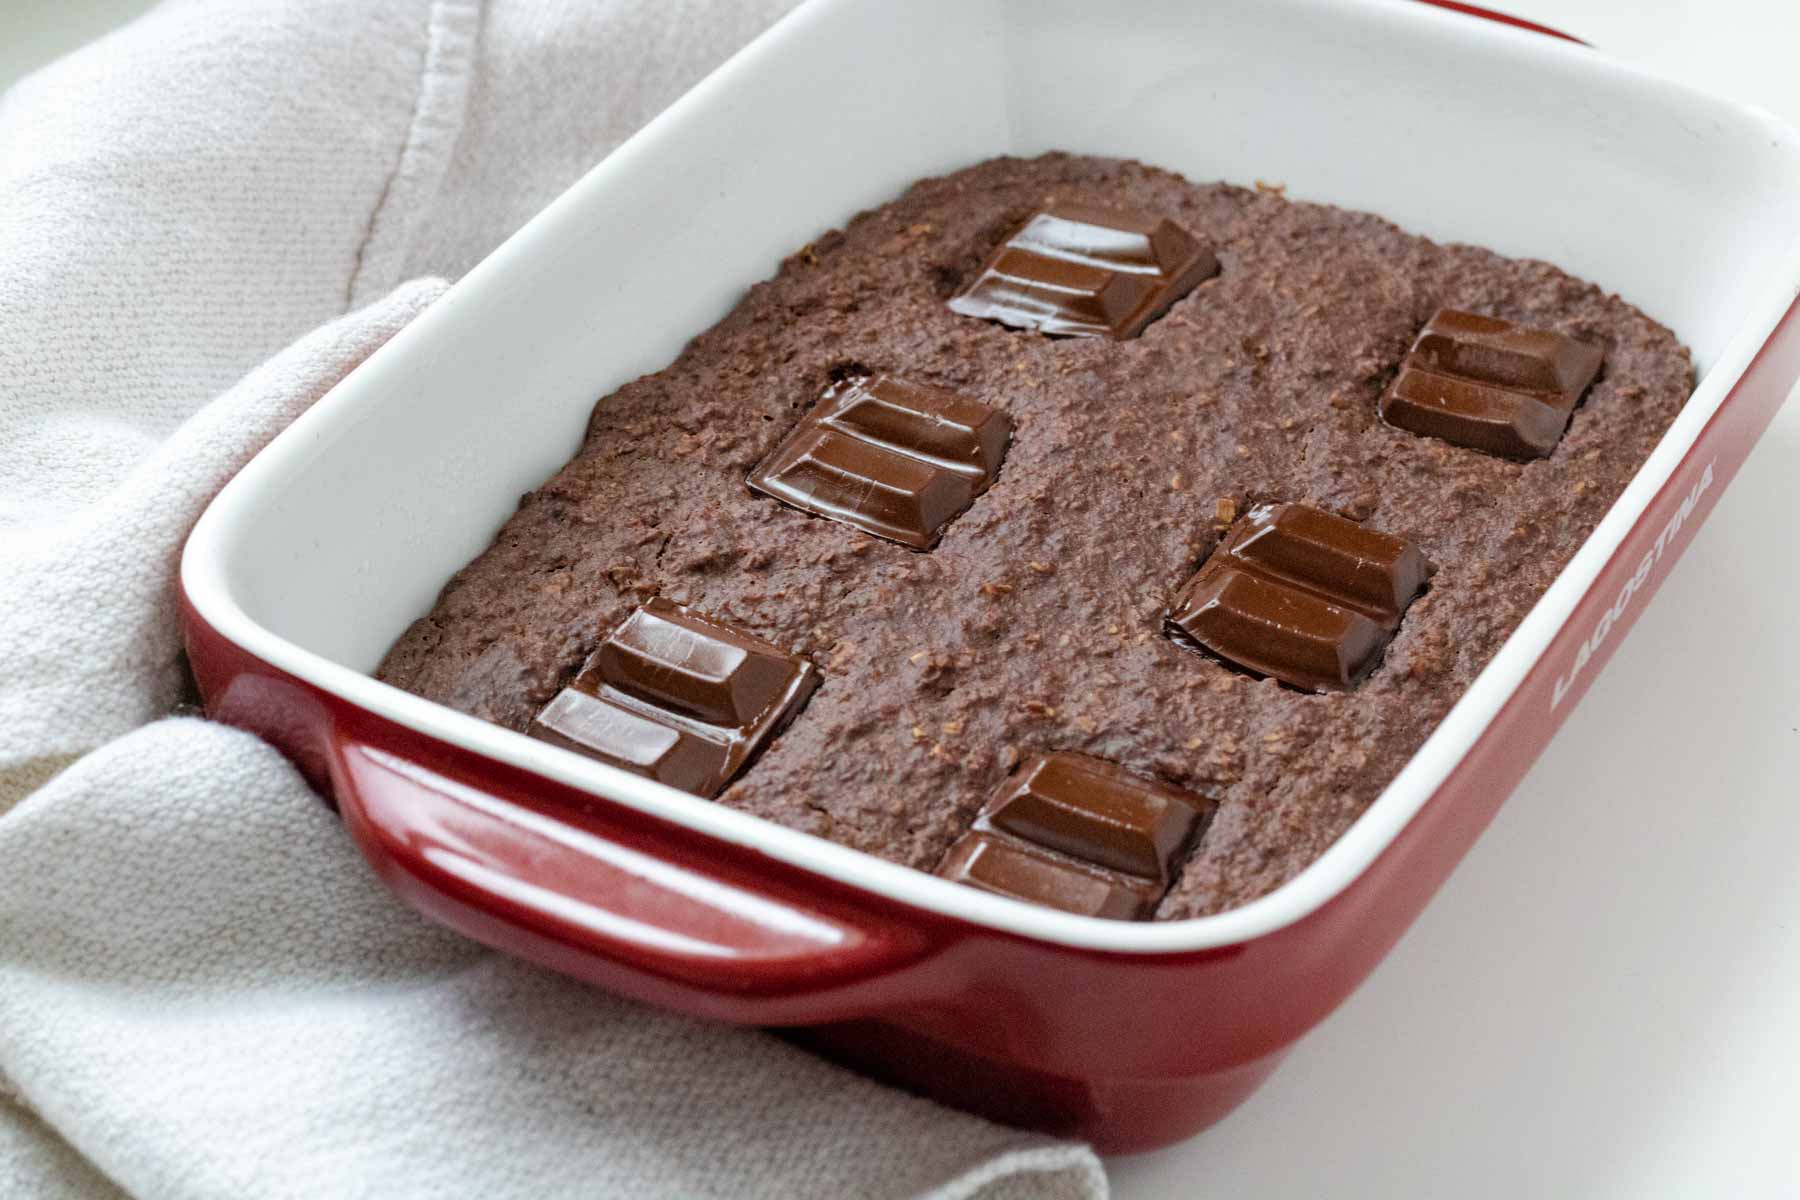 Vegan chocolate baked oats in a baking dish.